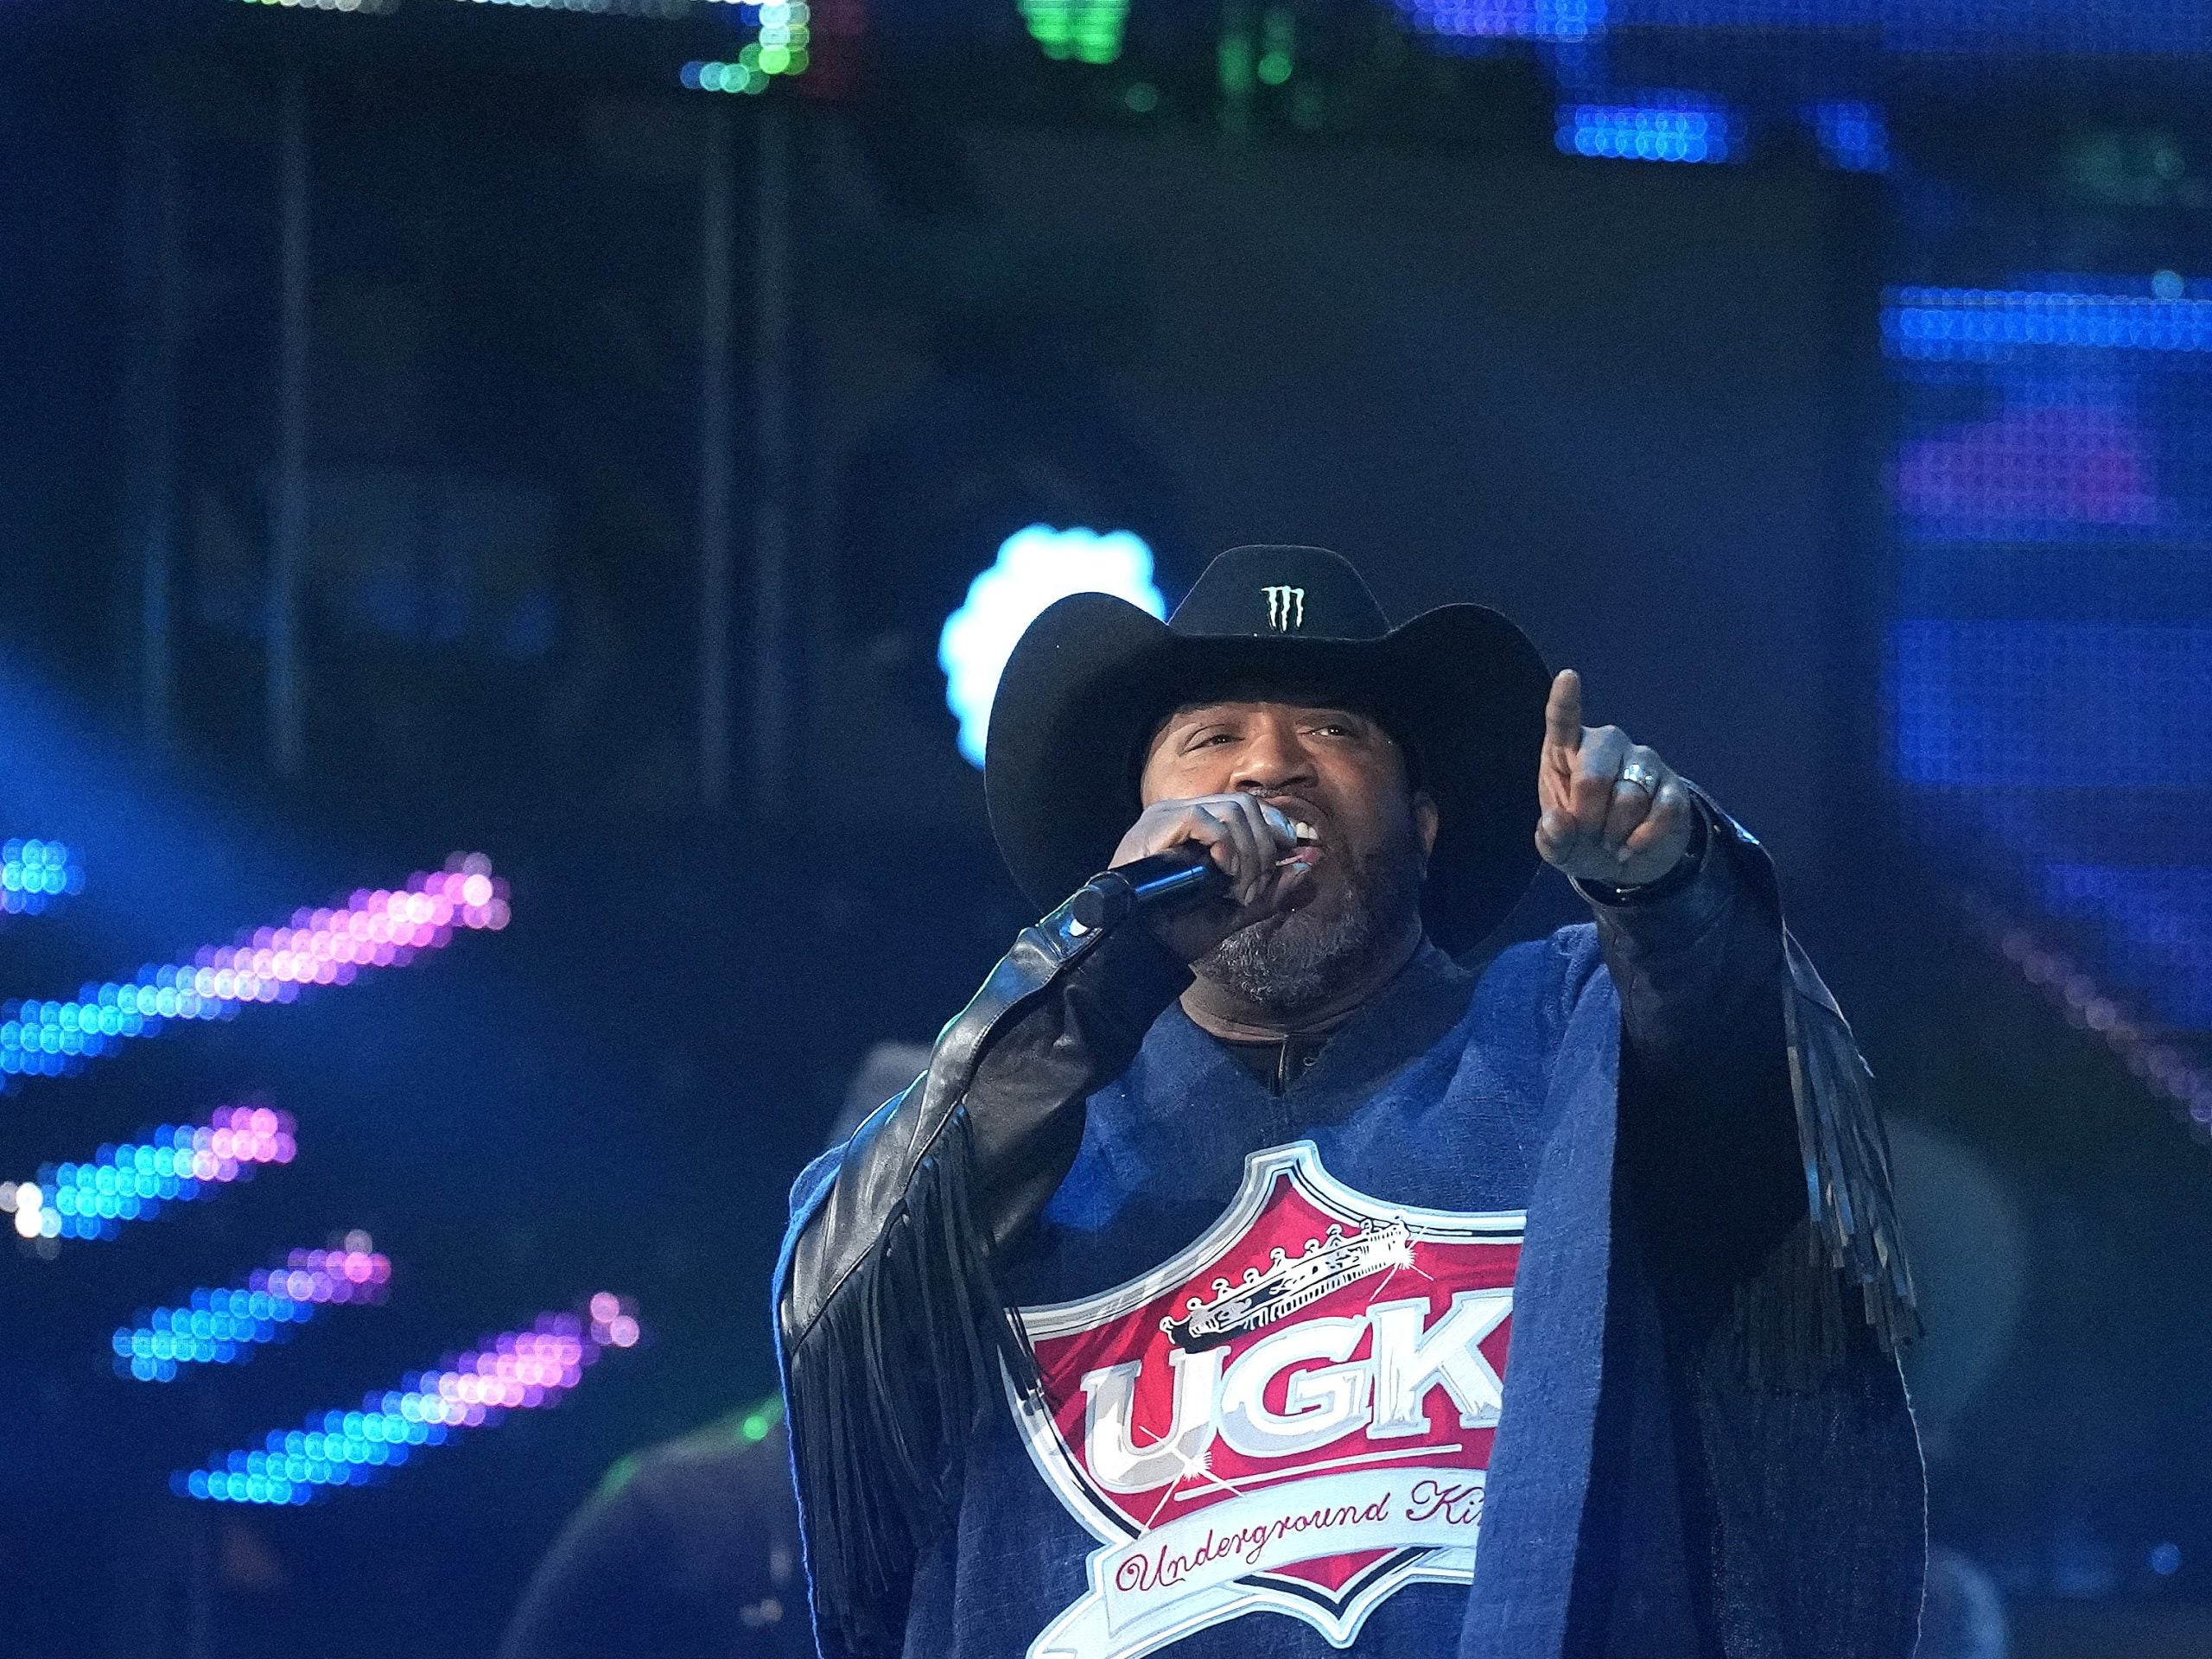 50 Cent, Bun B, Jelly Roll And More Announced At Houston Livestock Show And Rodeo